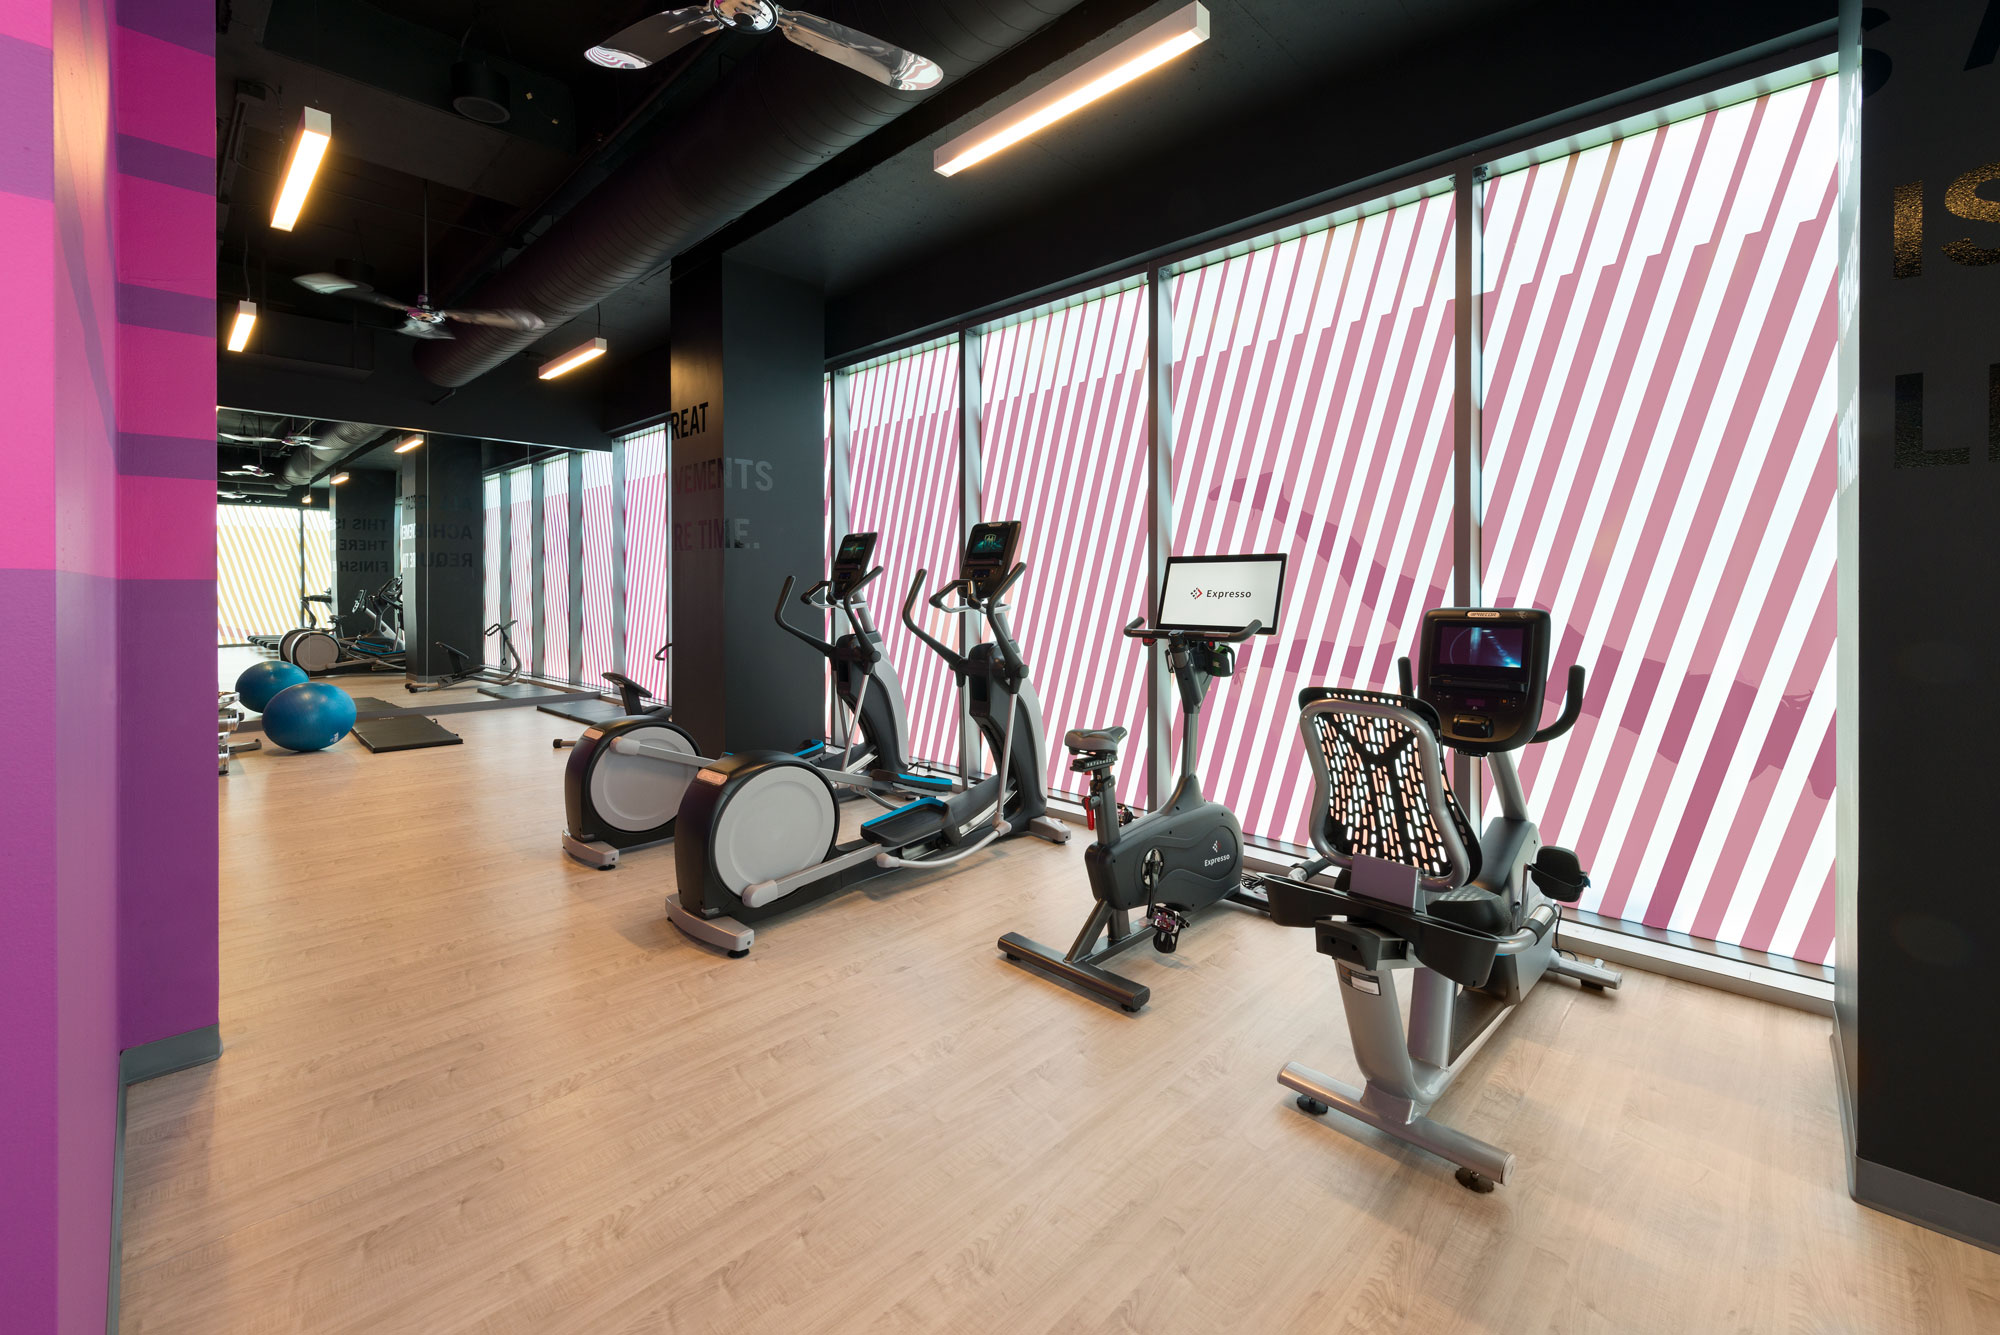 Bright, modern fitness center with weight lifting equipment and treadmills